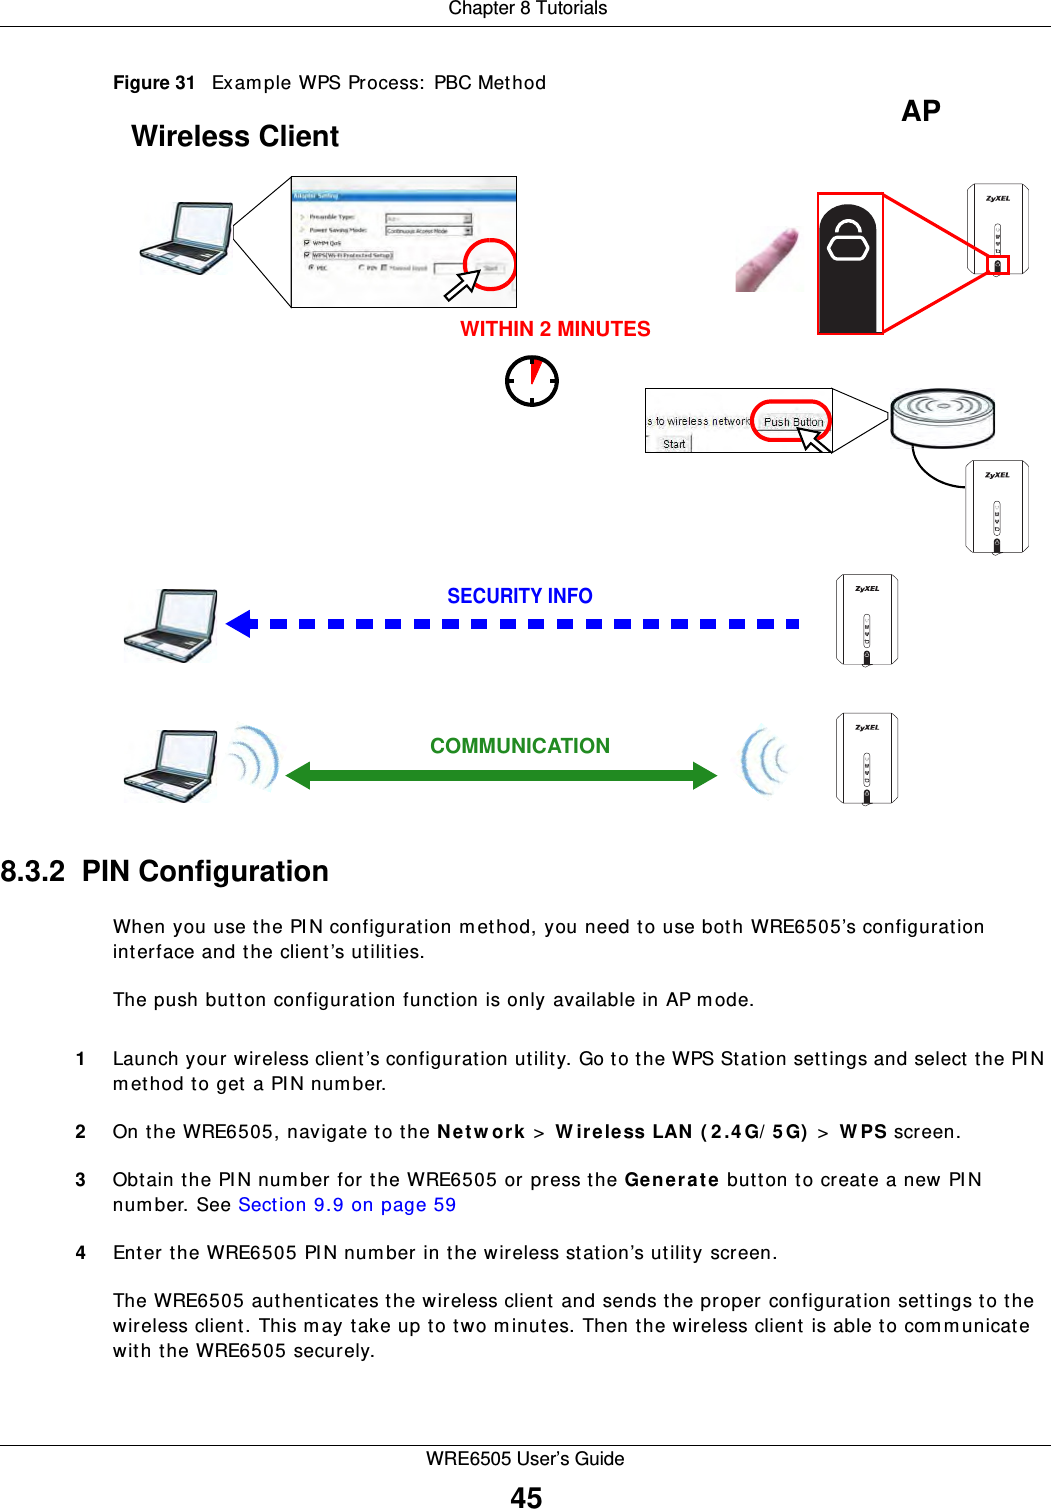  Chapter 8 TutorialsWRE6505 User’s Guide45Figure 31   Example WPS Process:  PBC Method8.3.2  PIN ConfigurationWhen you use the PIN configuration m ethod, you need to use both WRE6505’s configuration interface and the client’s utilities.The push button configuration function is only available in AP m ode.1Launch your wireless client ’s configuration utility. Go to the WPS Station settings and select the PI N method to get a PIN num ber.2On the WRE6505, navigate to the N e t w or k  &gt;  W ir eless LAN ( 2 .4 G/ 5 G)  &gt;  W PS screen.3Obtain the PI N num ber for the WRE6505 or press the Ge ne r at e  button to create a new PI N num ber. See Section 9.9 on page 594Enter the WRE6505 PI N num ber in the wireless station’s utility screen. The WRE6505 authenticates the wireless client and sends the proper configuration settings to the wireless client. This m ay take up to two m inutes. Then the wireless client is able to comm unicate with the WRE6505 securely. 2.4G2.4G5G5GWireless Client    SECURITY INFOCOMMUNICATIONWITHIN 2 MINUTESAP2.4G2.4G5G5G2.4G2.4G5G5G2.4G2.4G5G5G